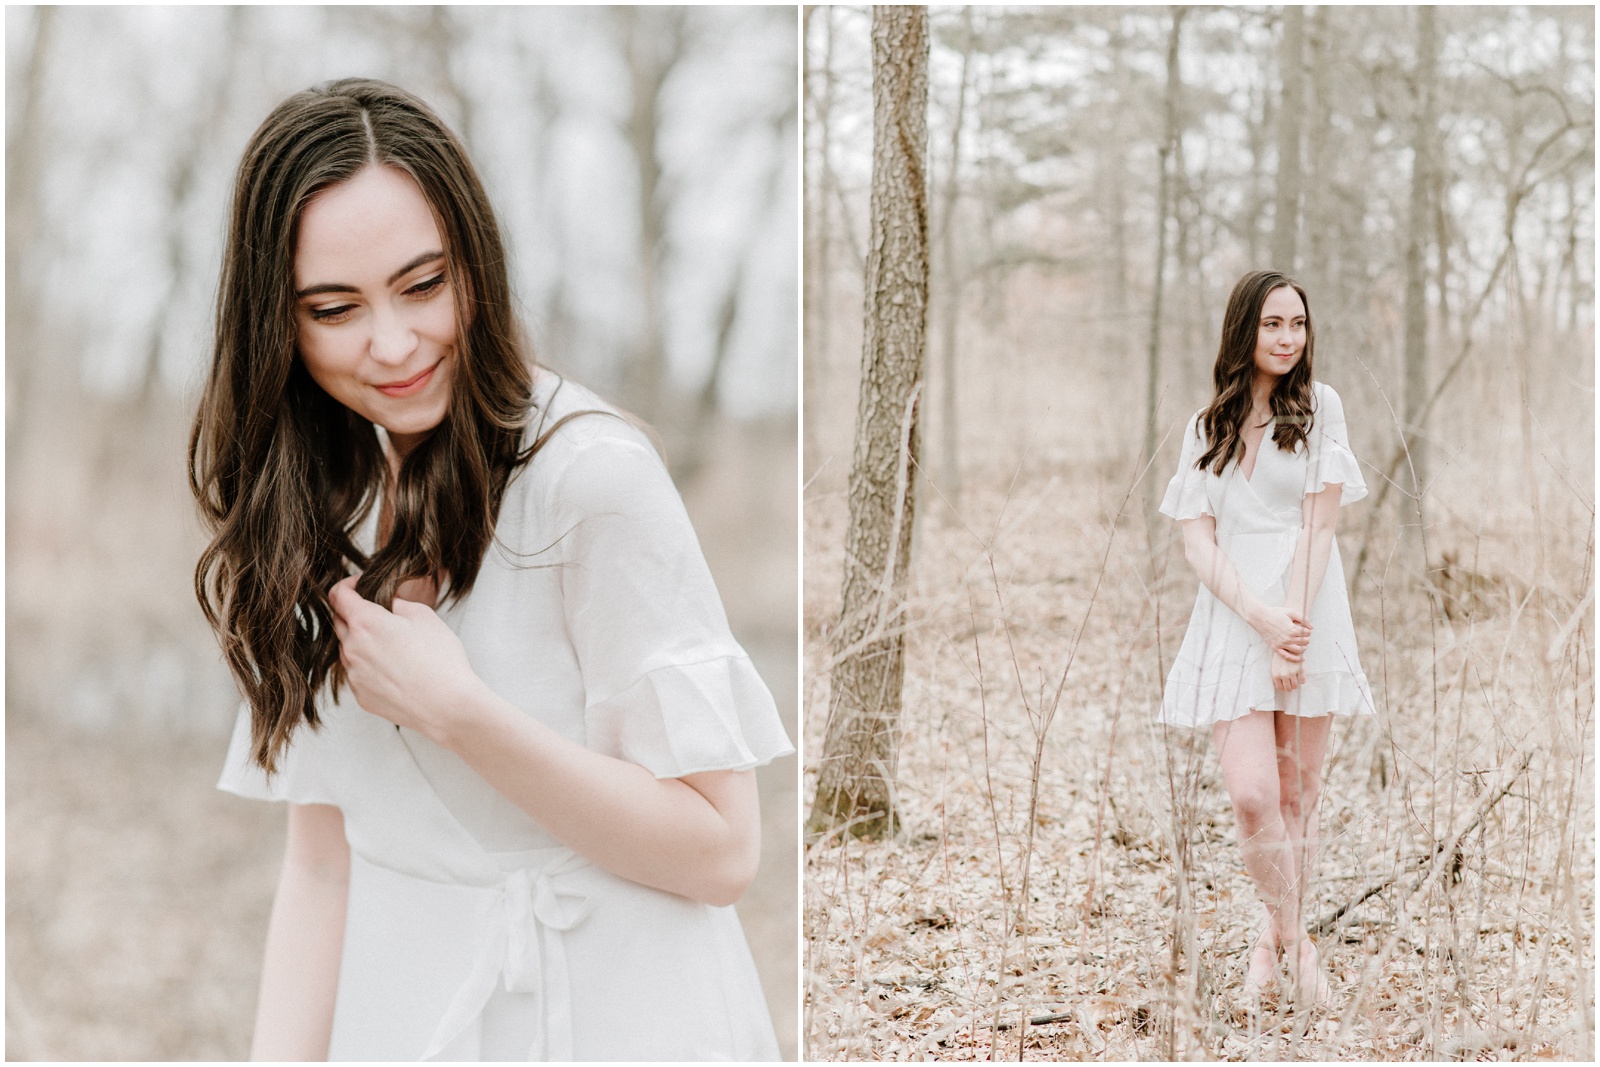 Senior photos in a forest preserve with a white dress